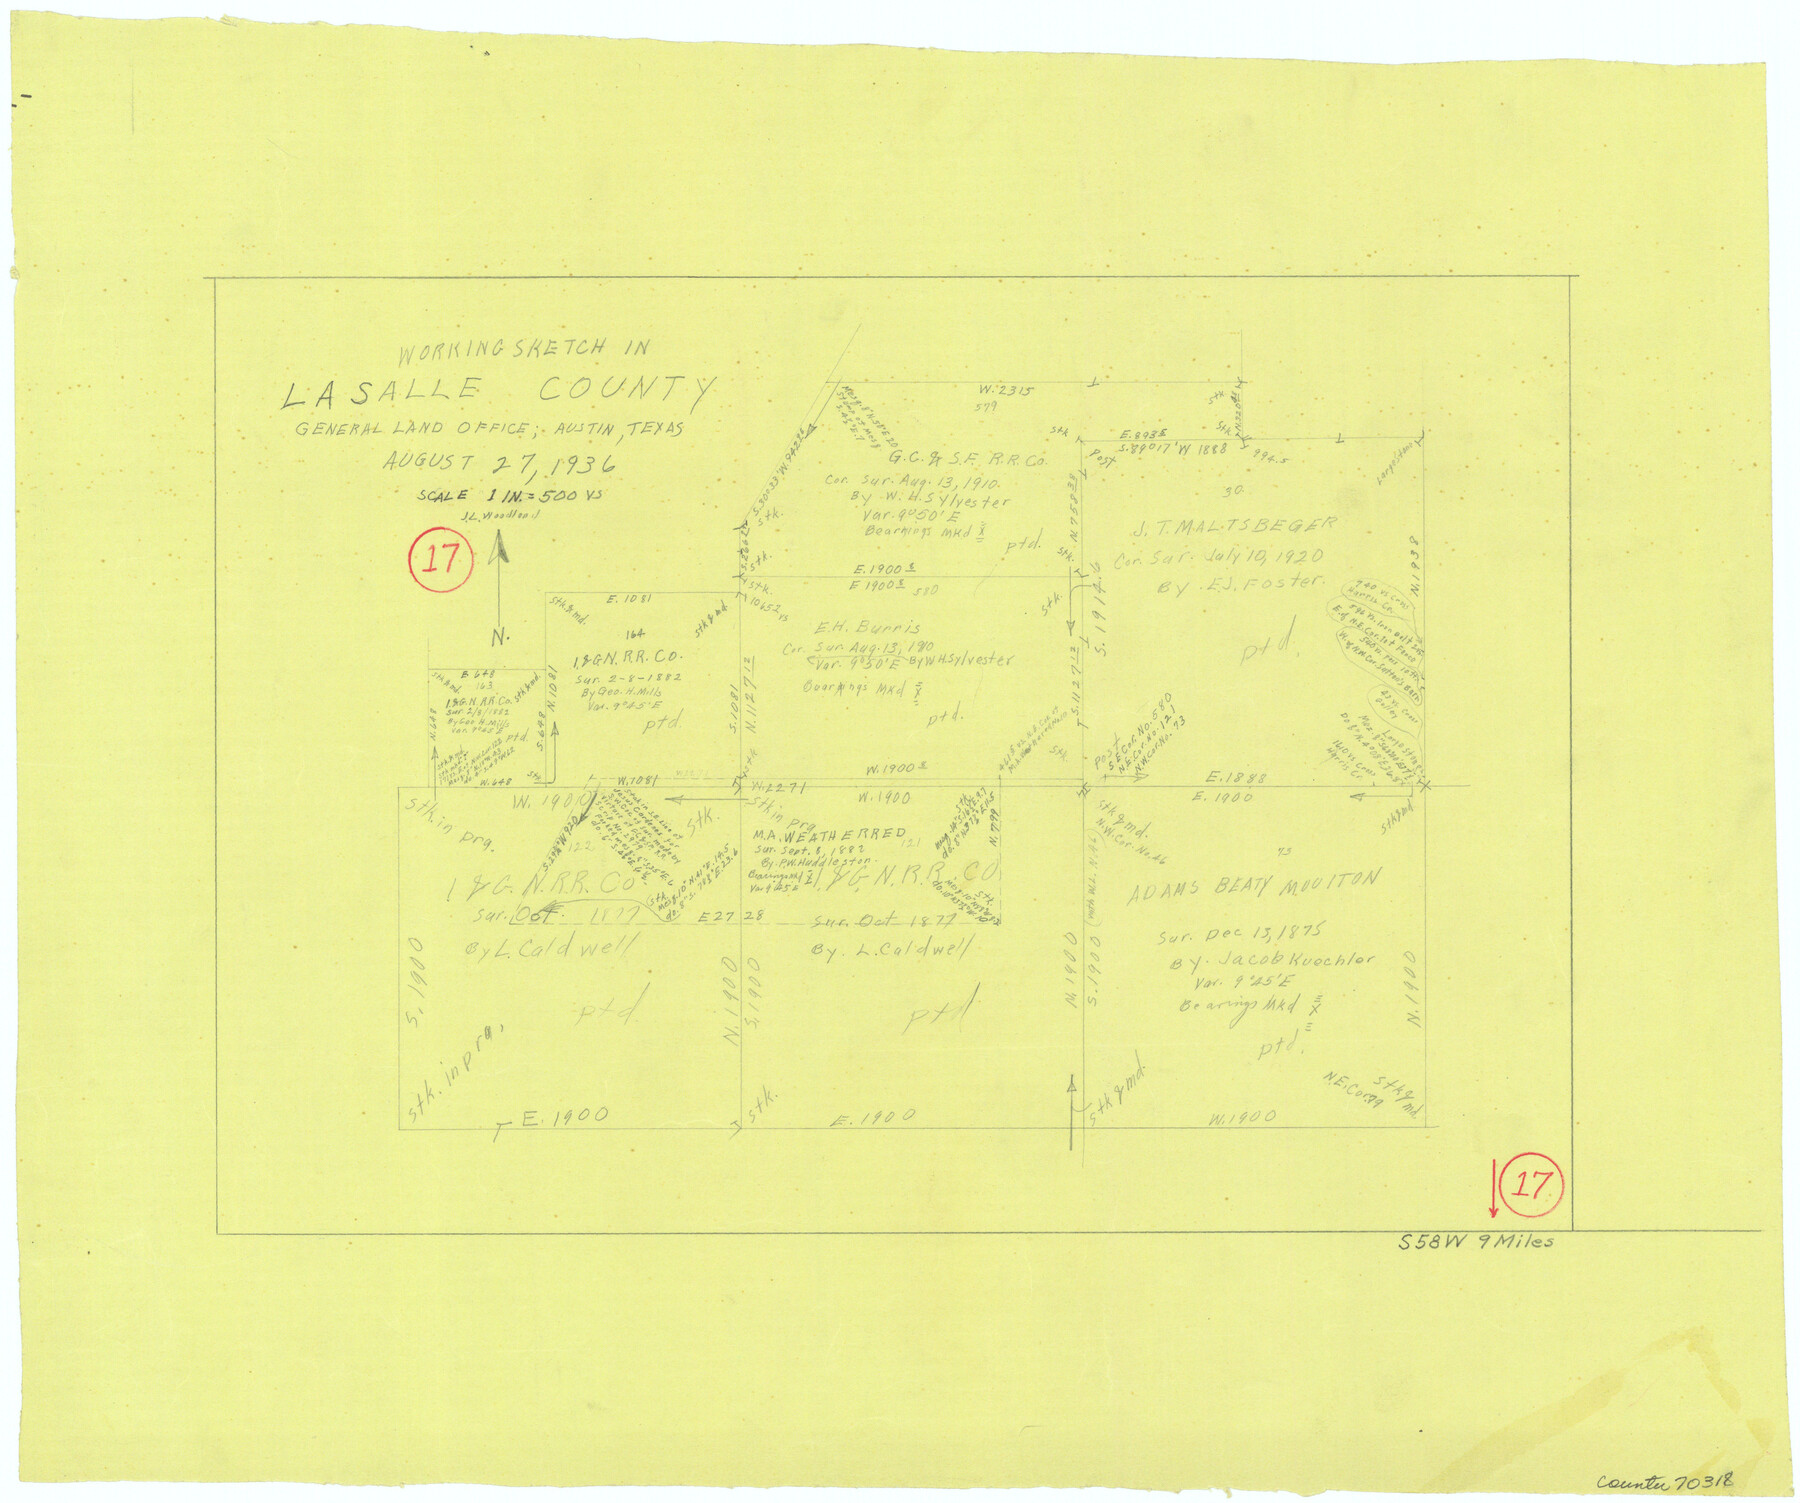 70318, La Salle County Working Sketch 17, General Map Collection